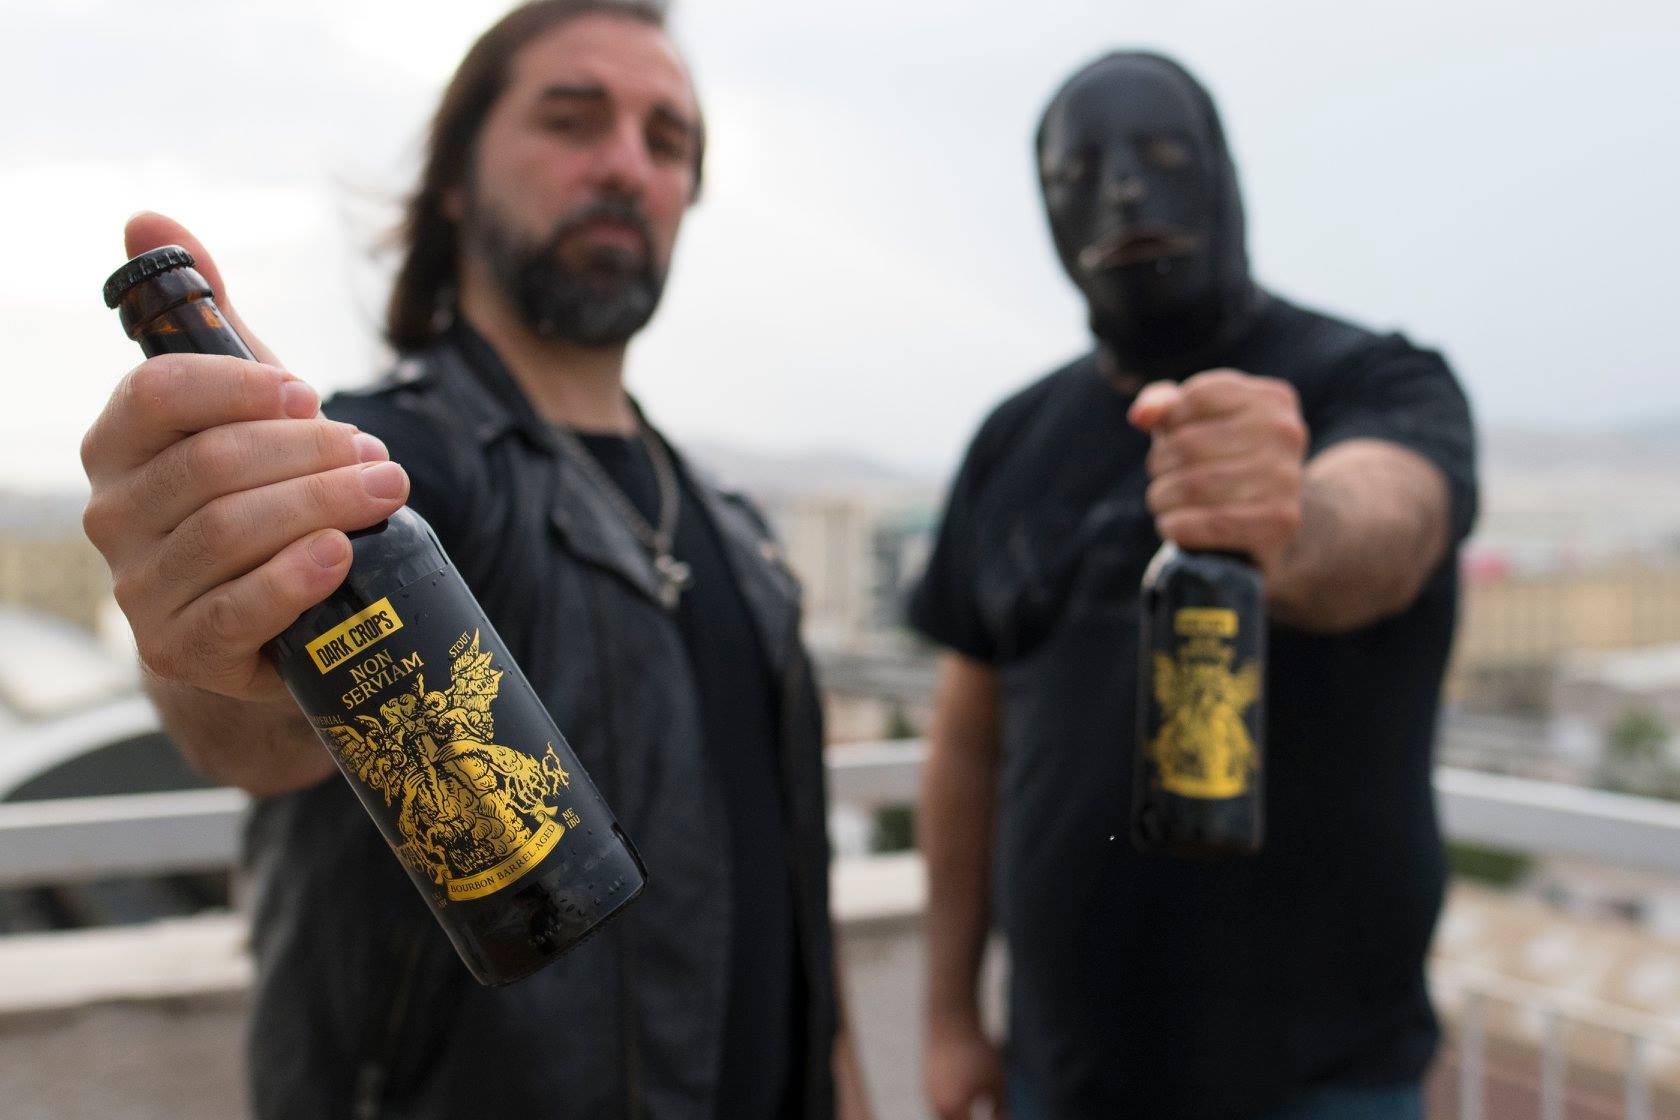 The first official Rotting Christ Craft Beer